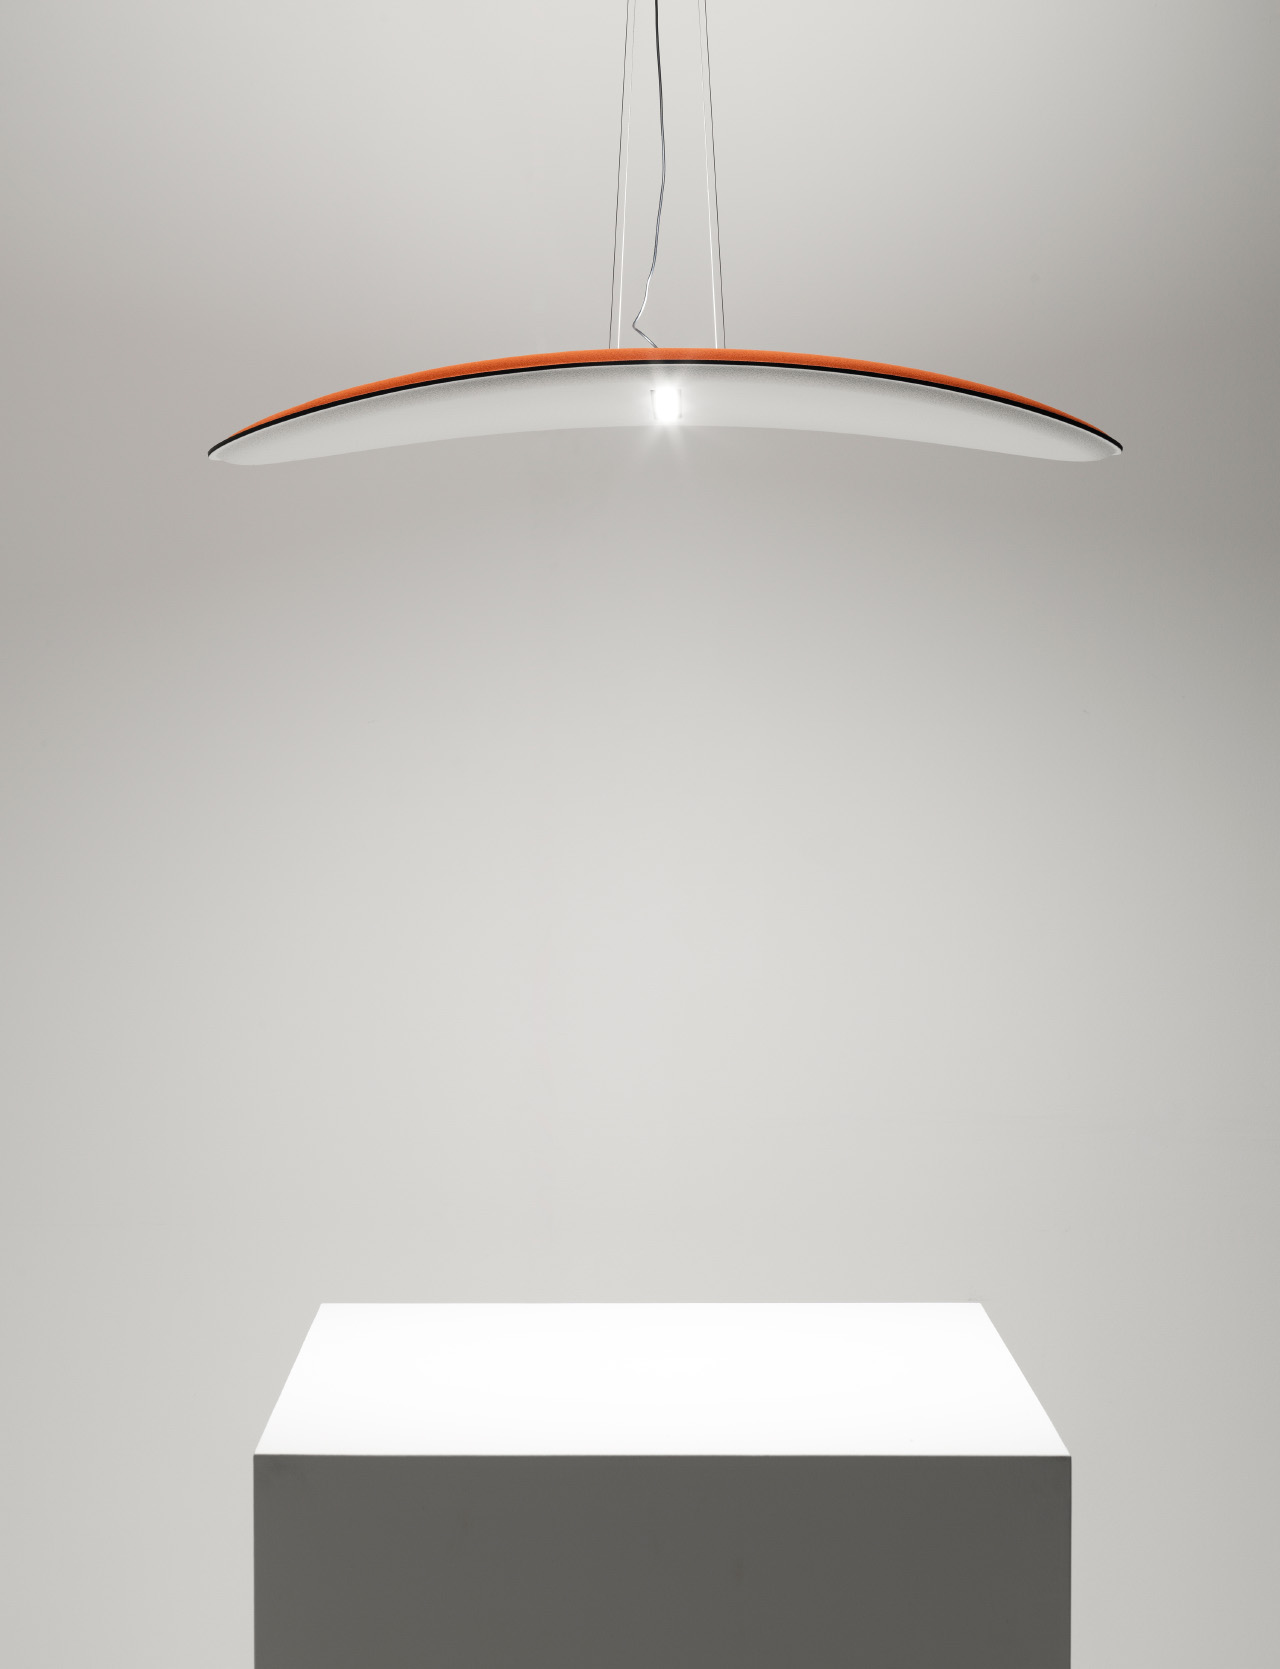 Derby-Lamp for Suspension